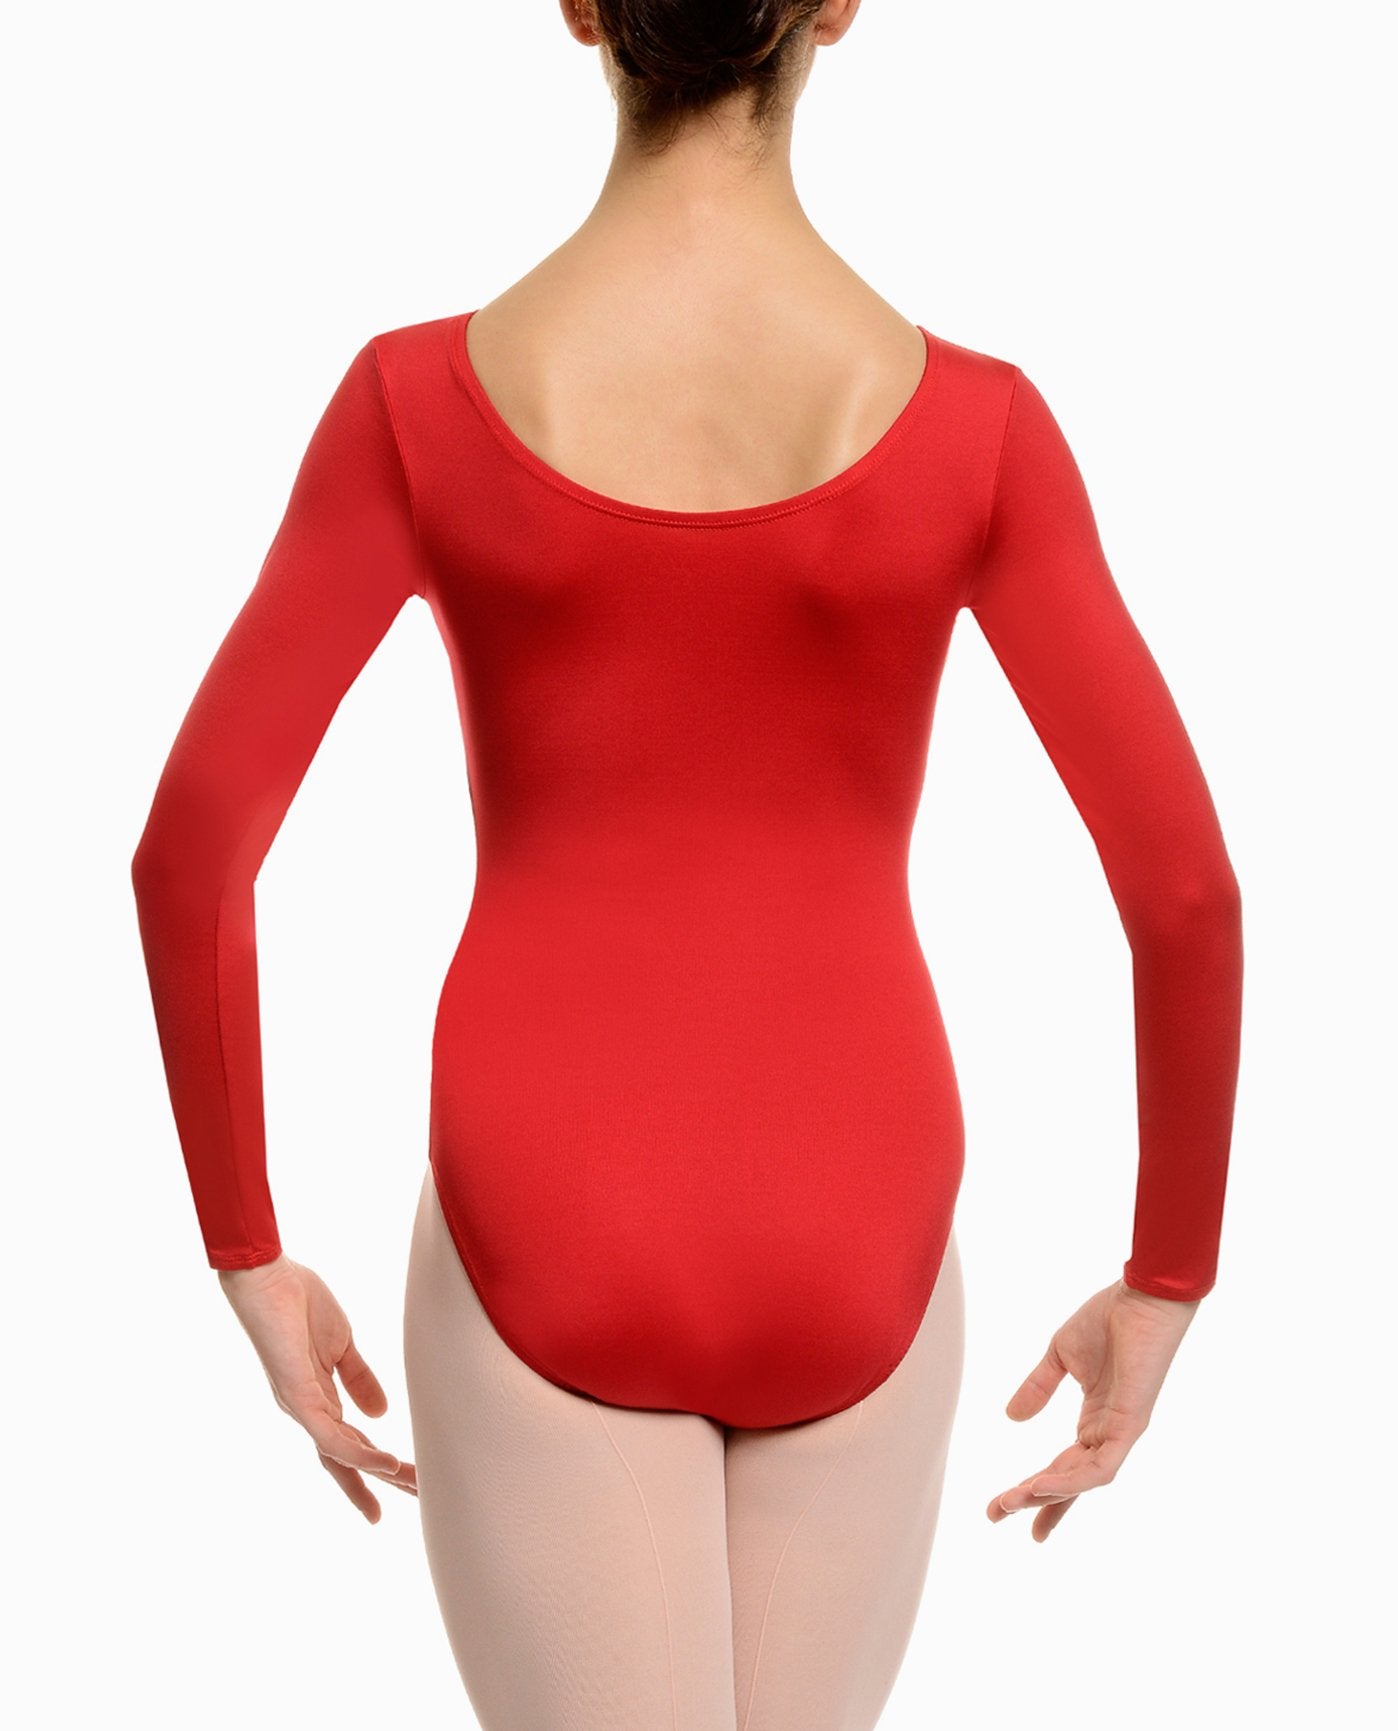 Confidence in Just a Leotard and Tights - The Whole Dancer